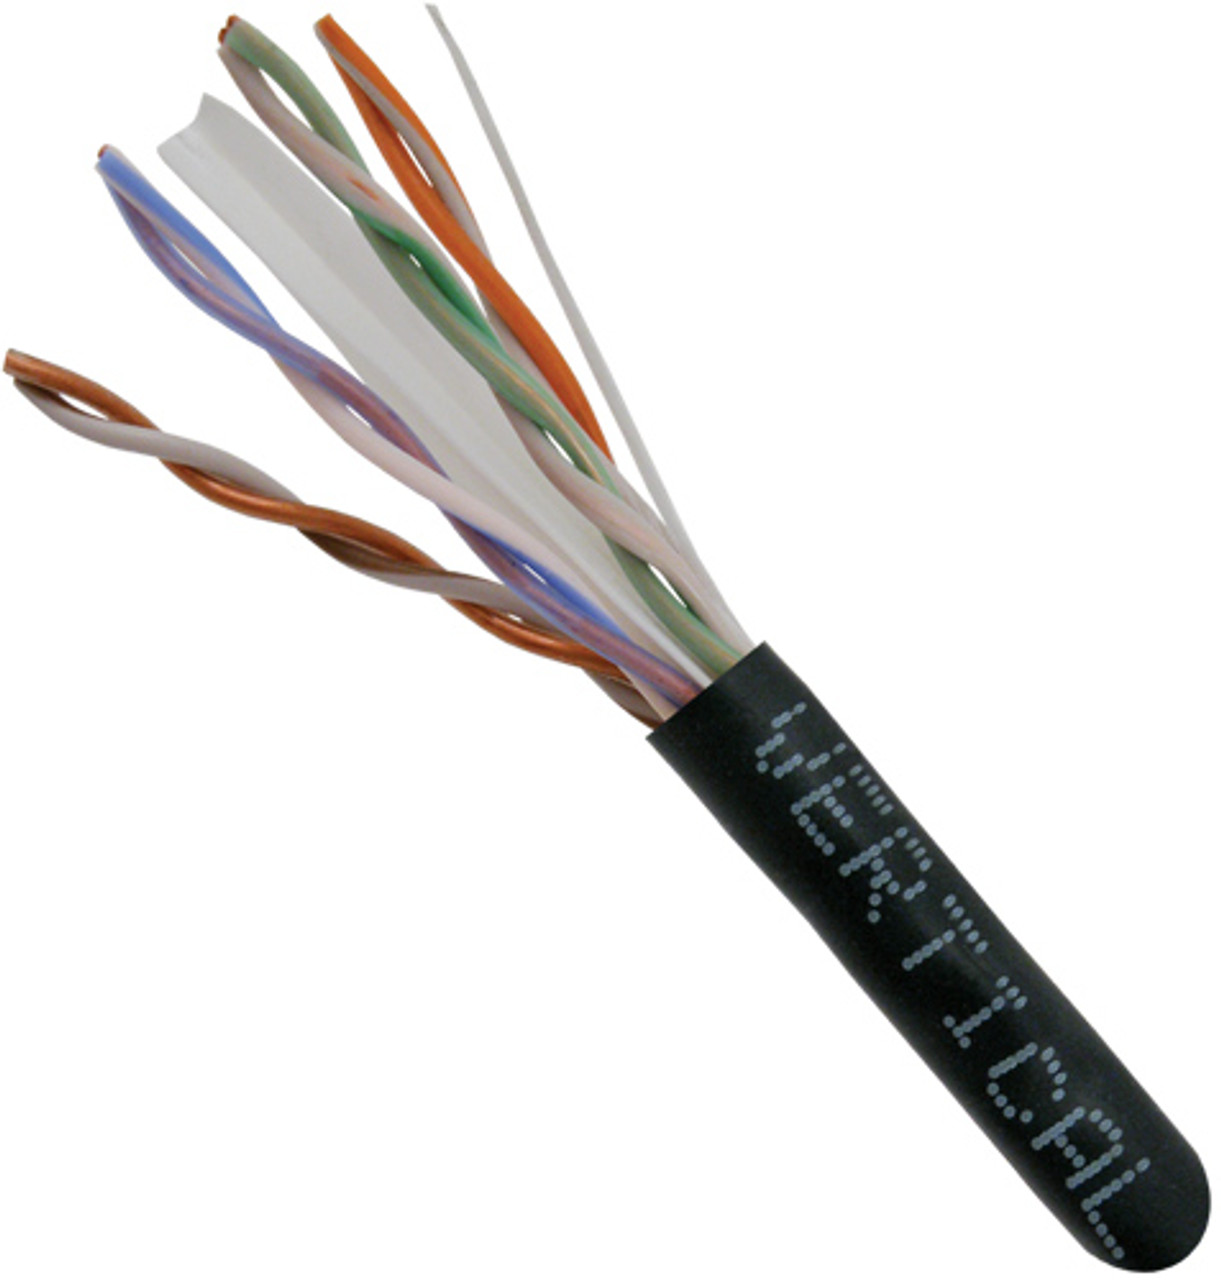 Category-6 23AWG UTP 8C Solid Bare Copper 550MHz Riser Rated PVC Jacket 1000ft